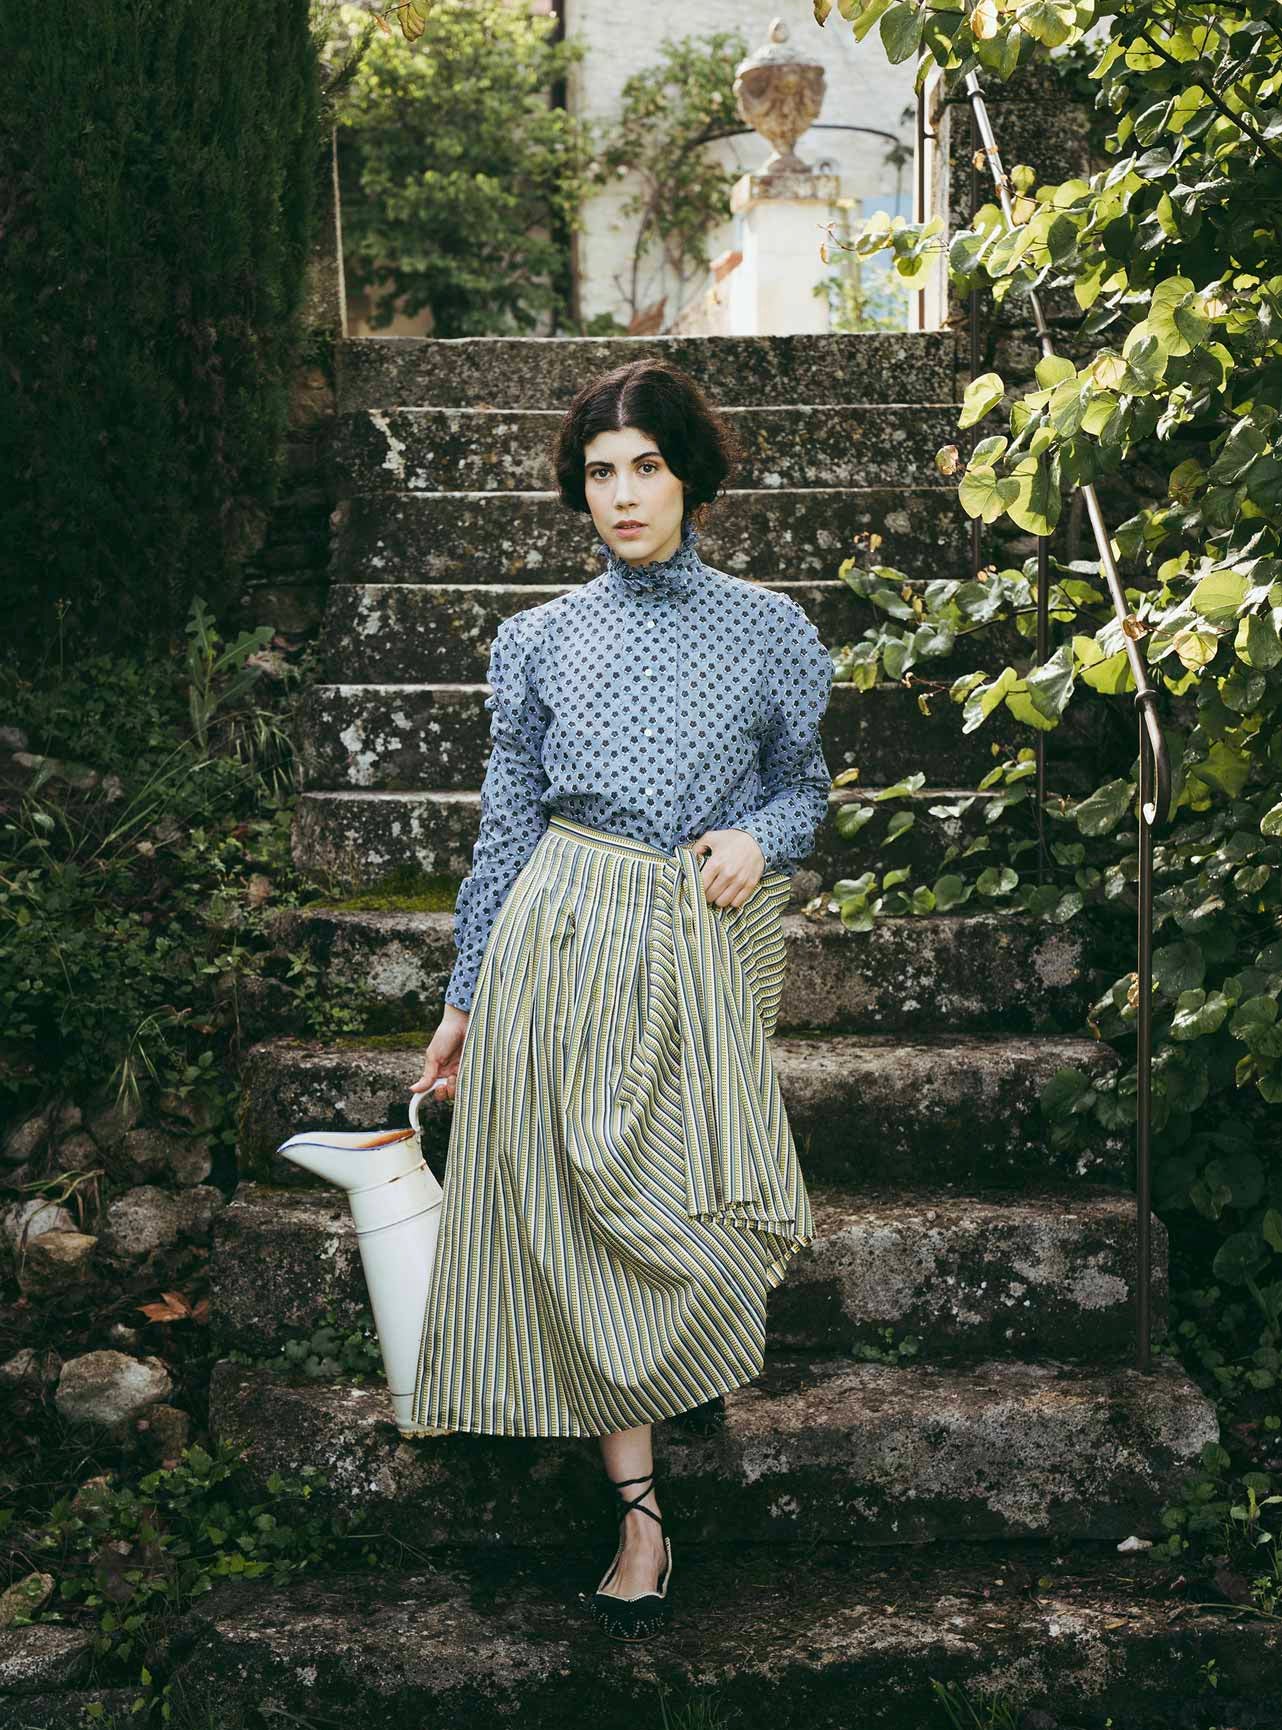 Louise wearing a Zouza yellow striped cotton skirt by Thierry Colson - photographed by  Jamie Beck